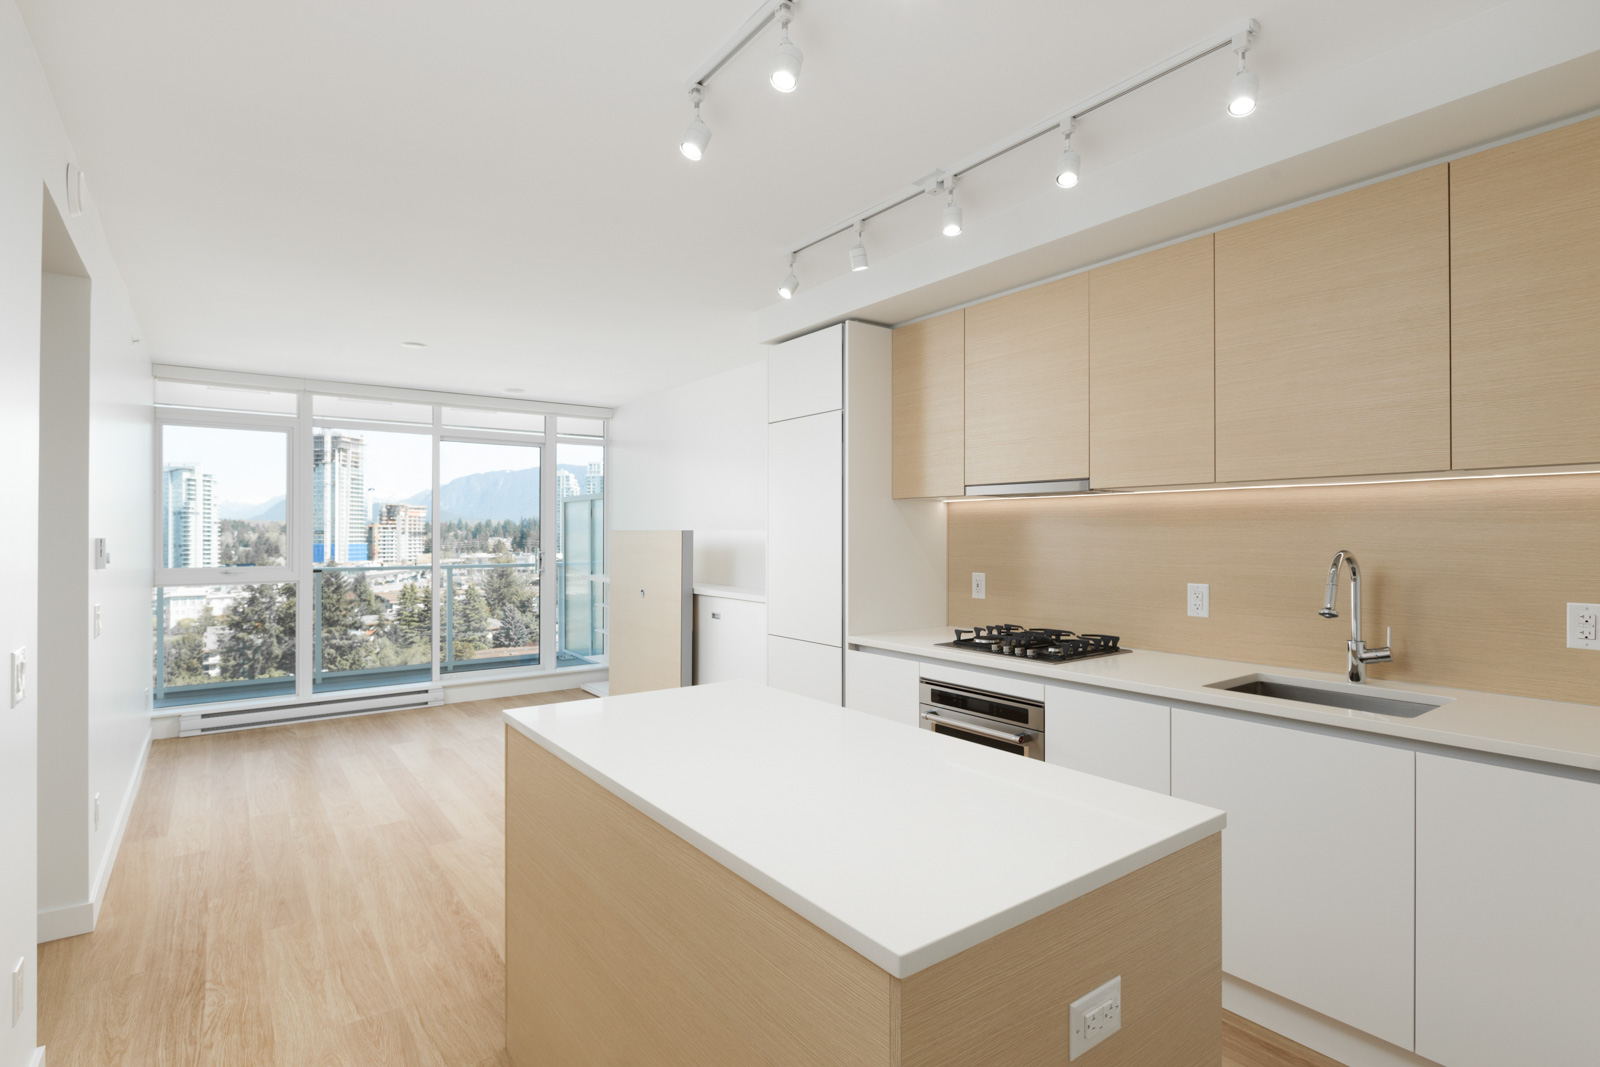 Bright spacious open kitchen with white quartz countertops and a kitchen island with outlets and new stainless steel appliances with natural lighting from floor-to-ceiling windows in a new condo in Coquitlam managed by Birds Nest Properties in Vancouver